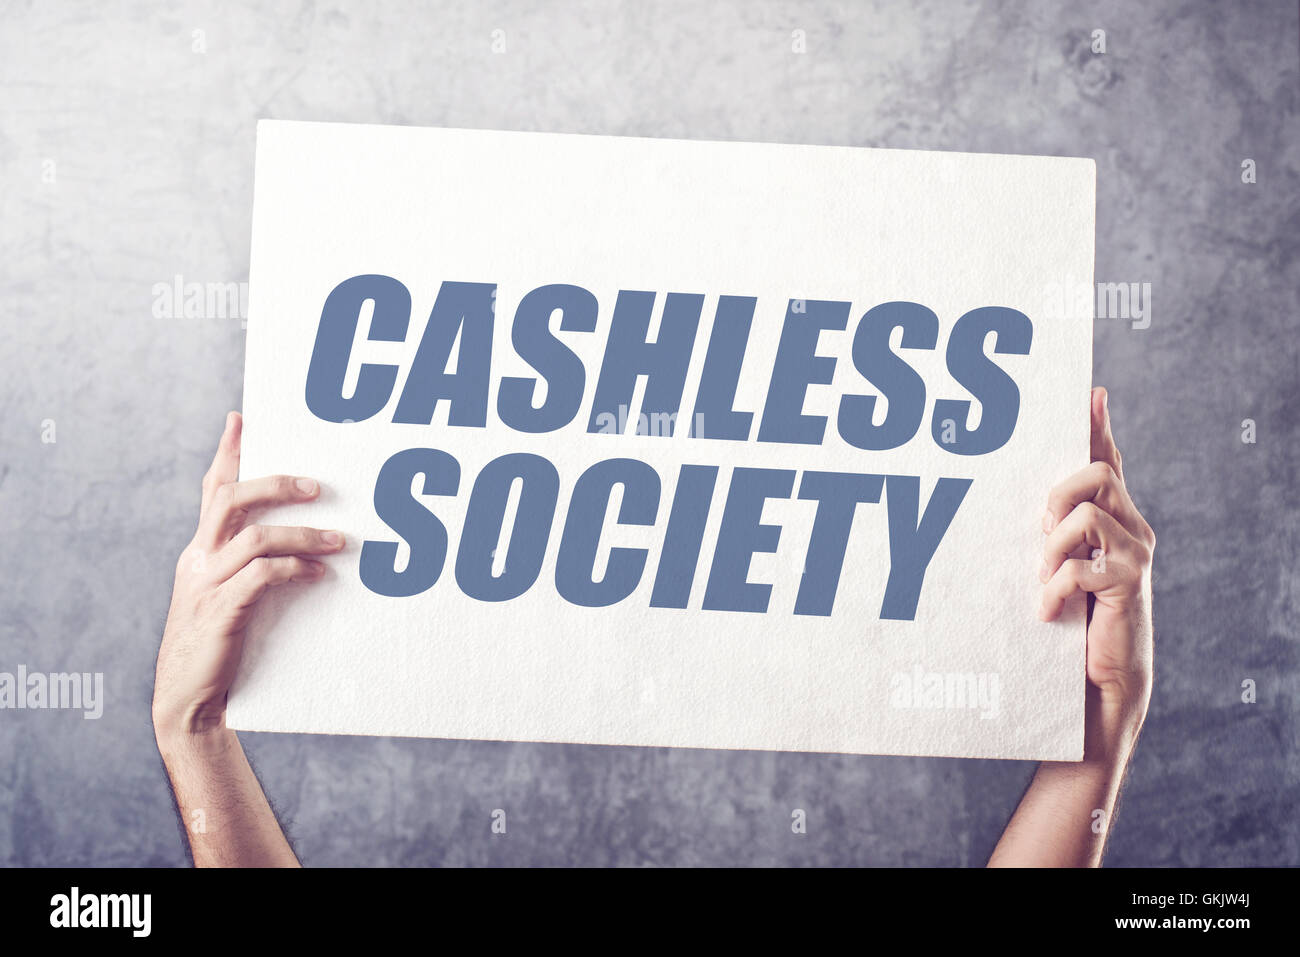 Hands holding banner with Cashless society title, concept of promoting mobile and electronic payments without cash money Stock Photo